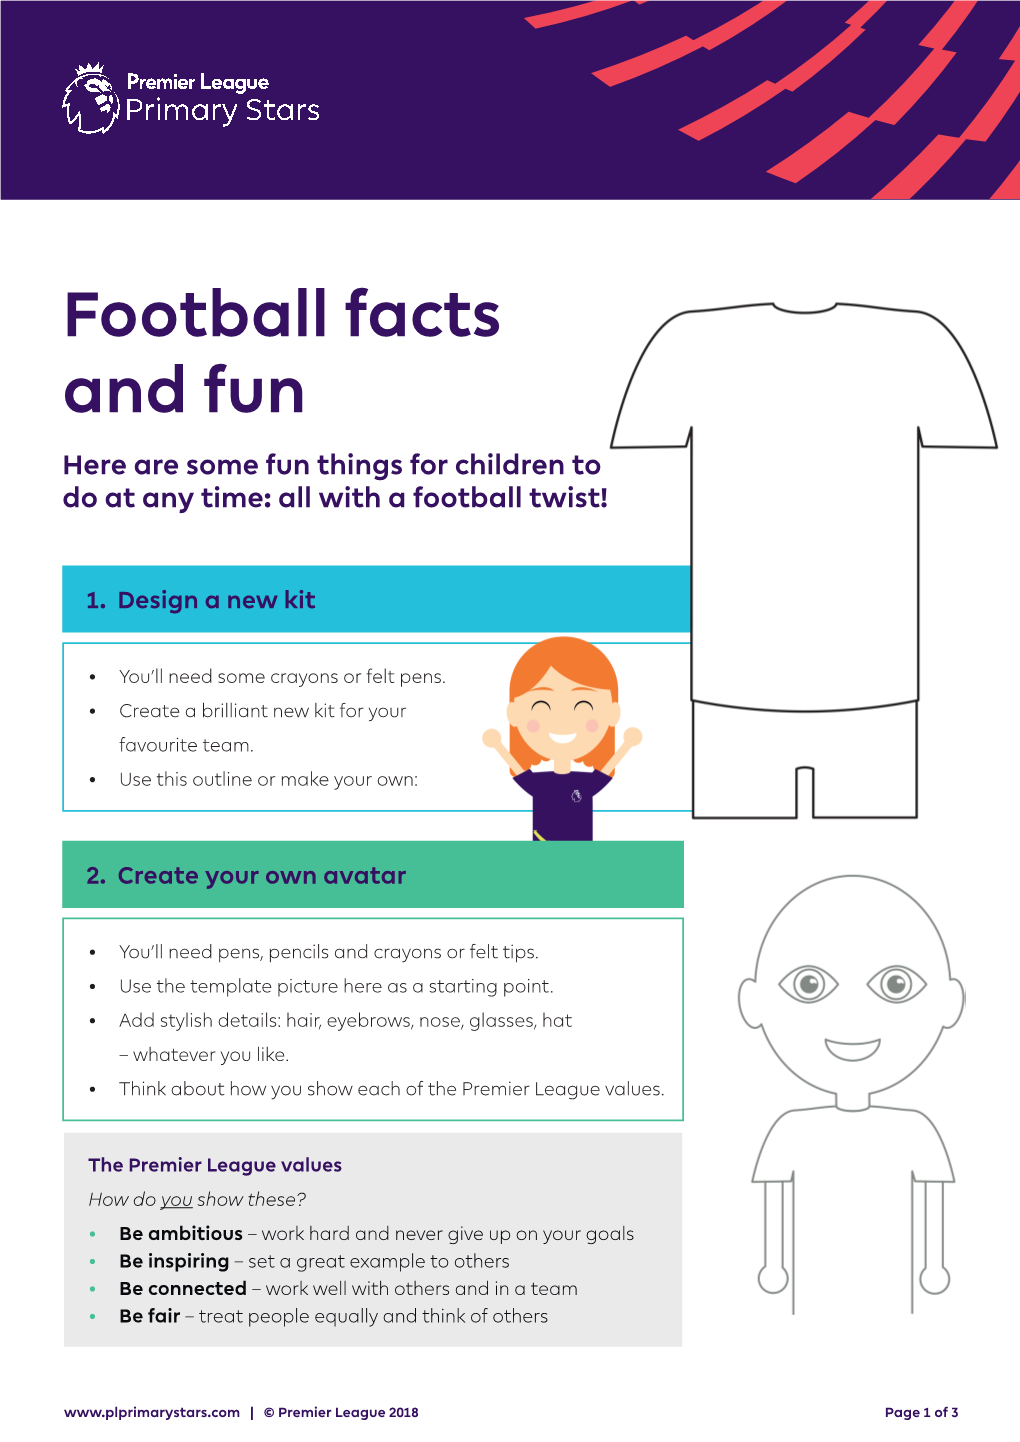 Premier League Spring Campaign Family Pack Football Facts And